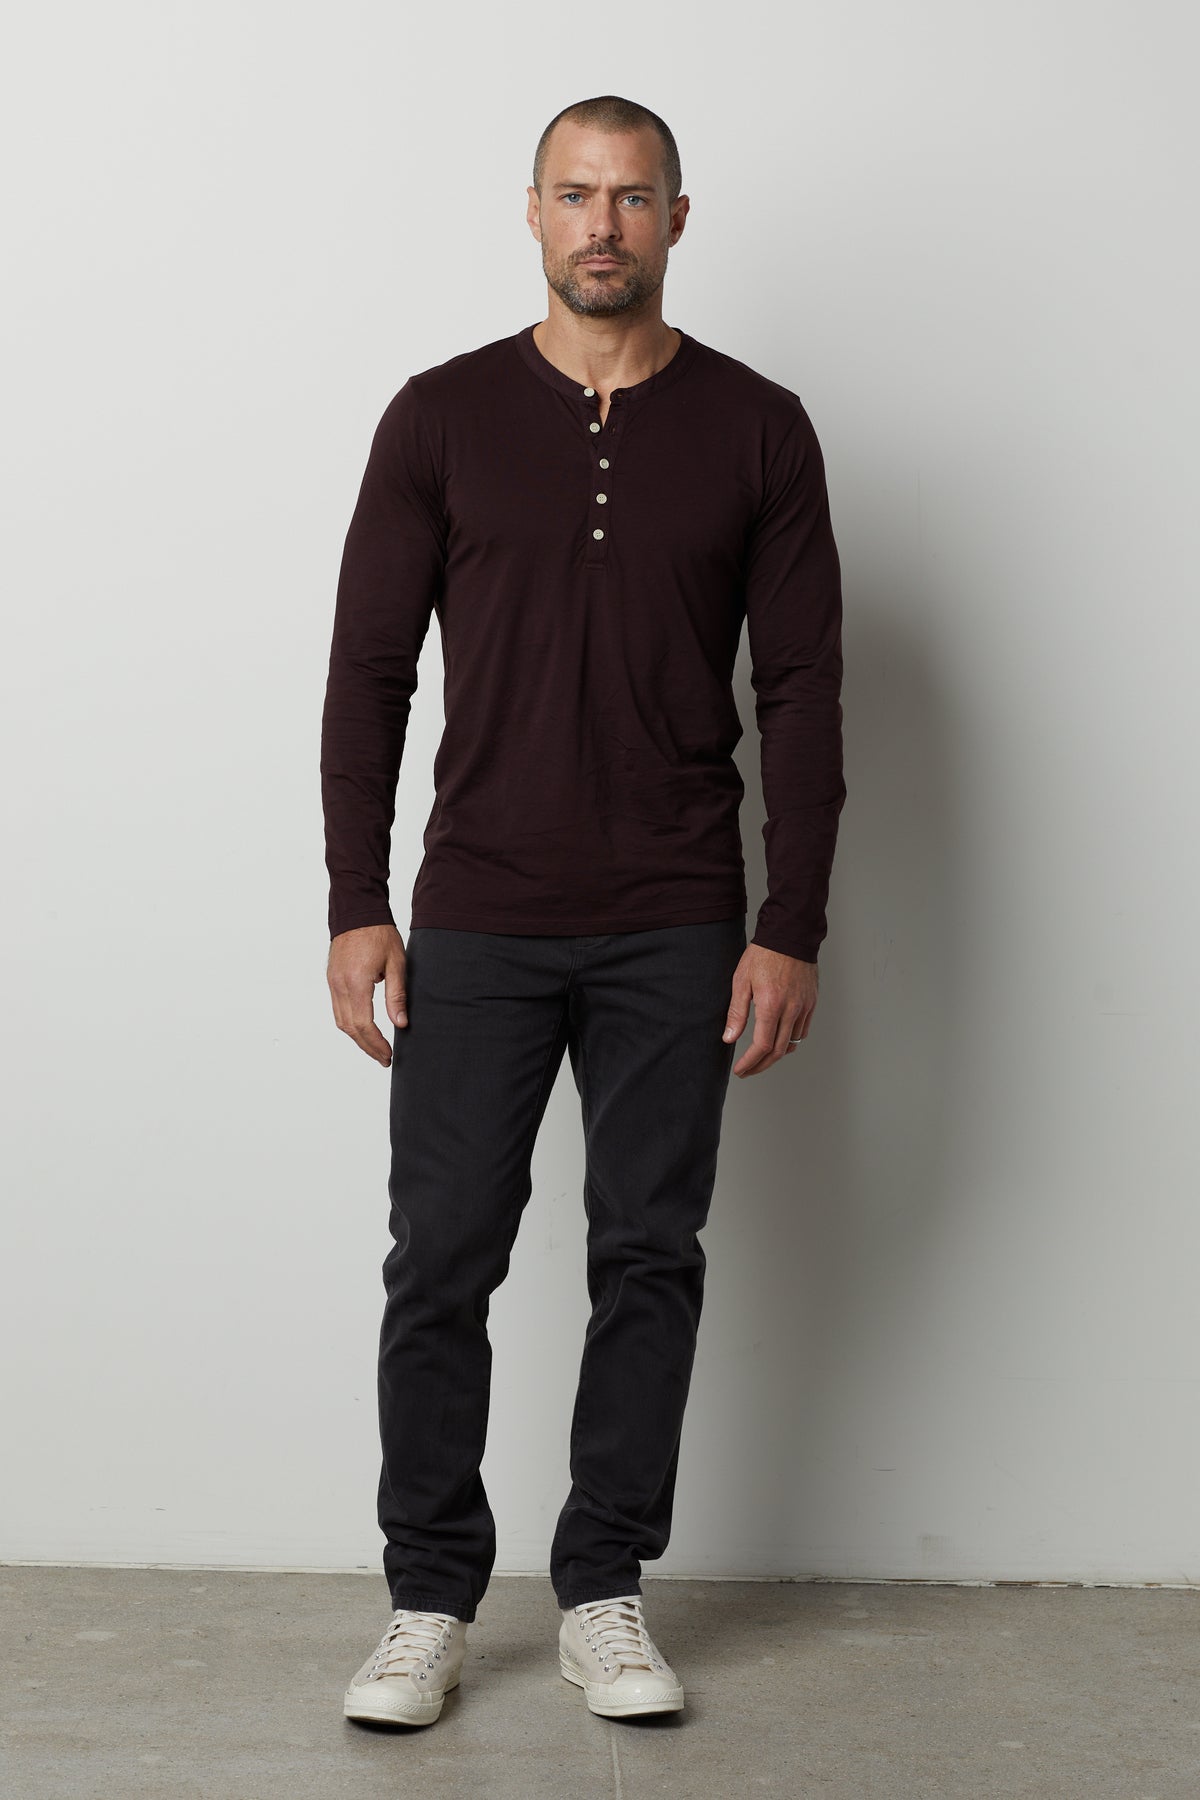 A man wearing a lightweight Alvaro Cotton Jersey Henley shirt by Velvet by Graham & Spencer and vintage-look black pants.-35547510341825